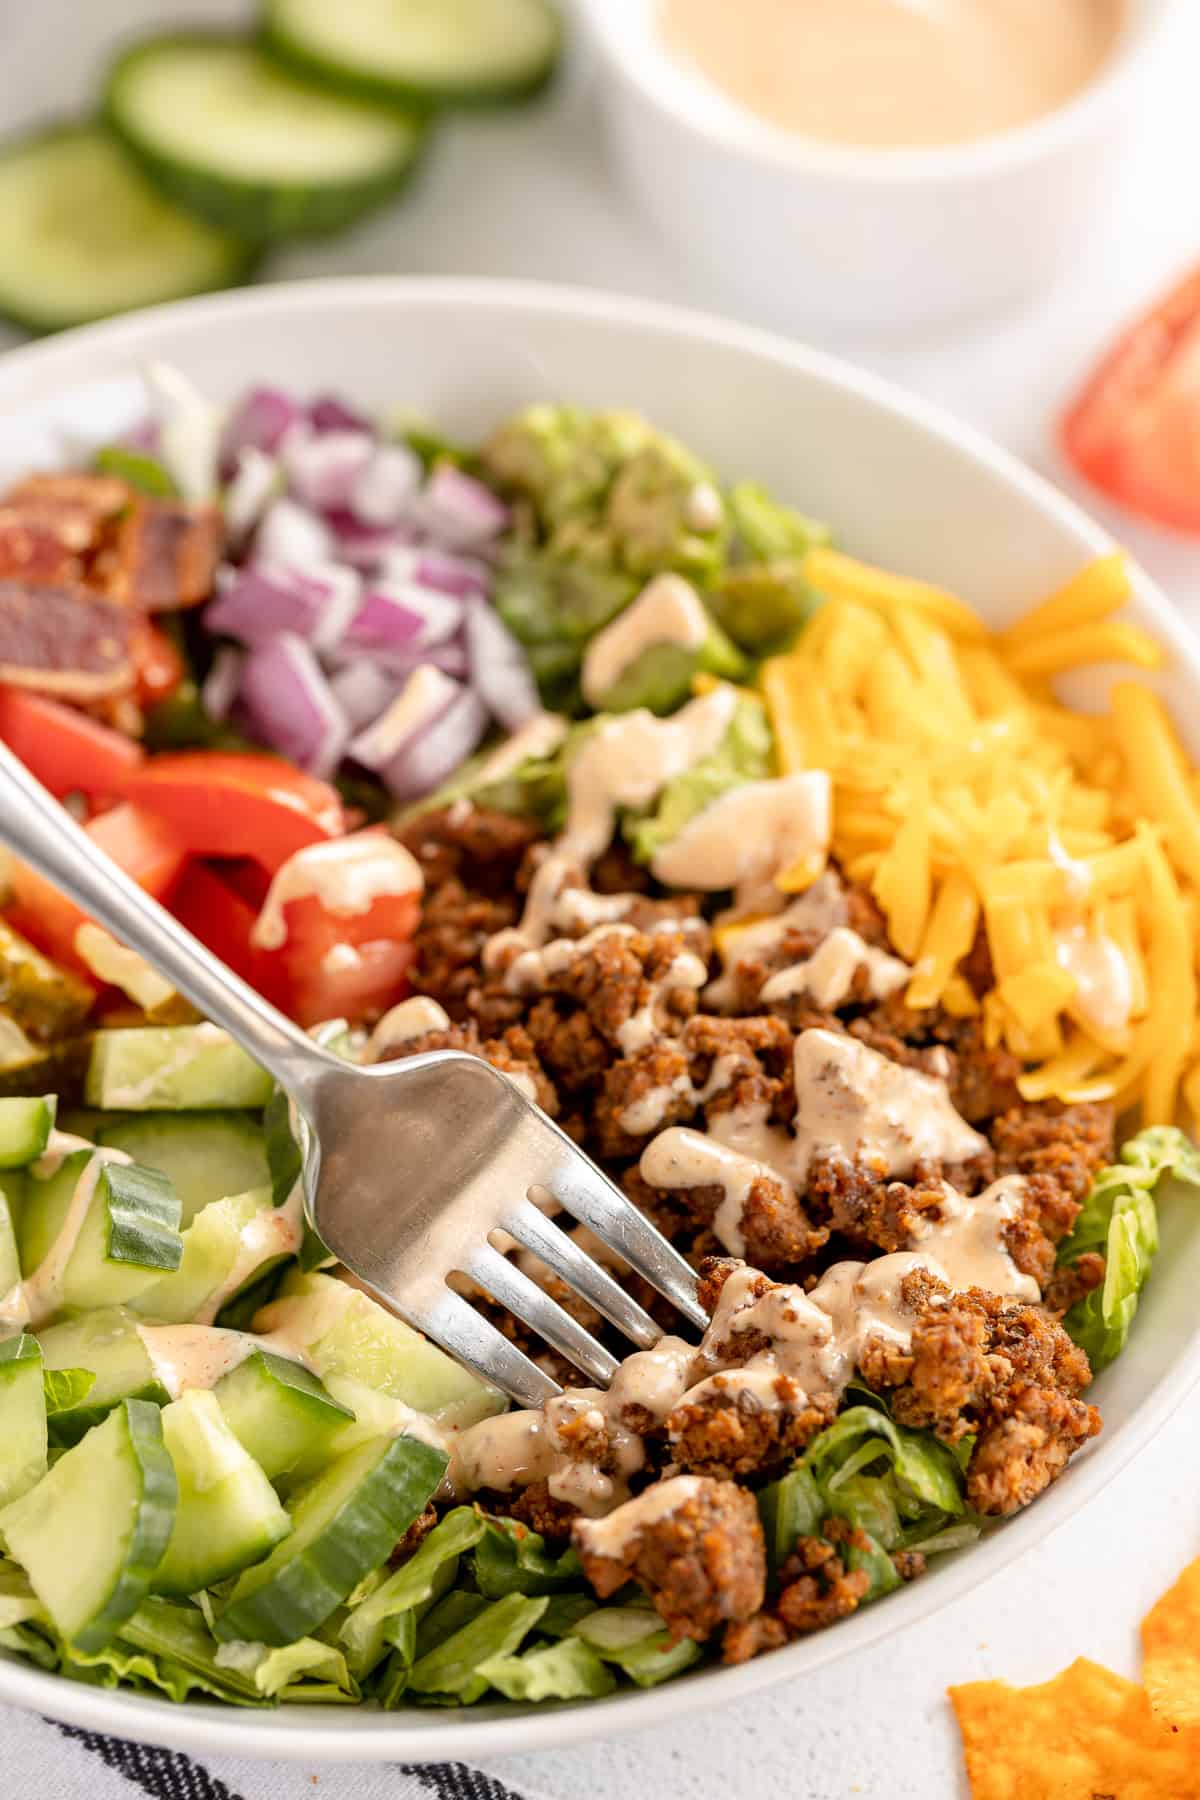 A fork pressing into ground beef in a bowl with other ingredients.